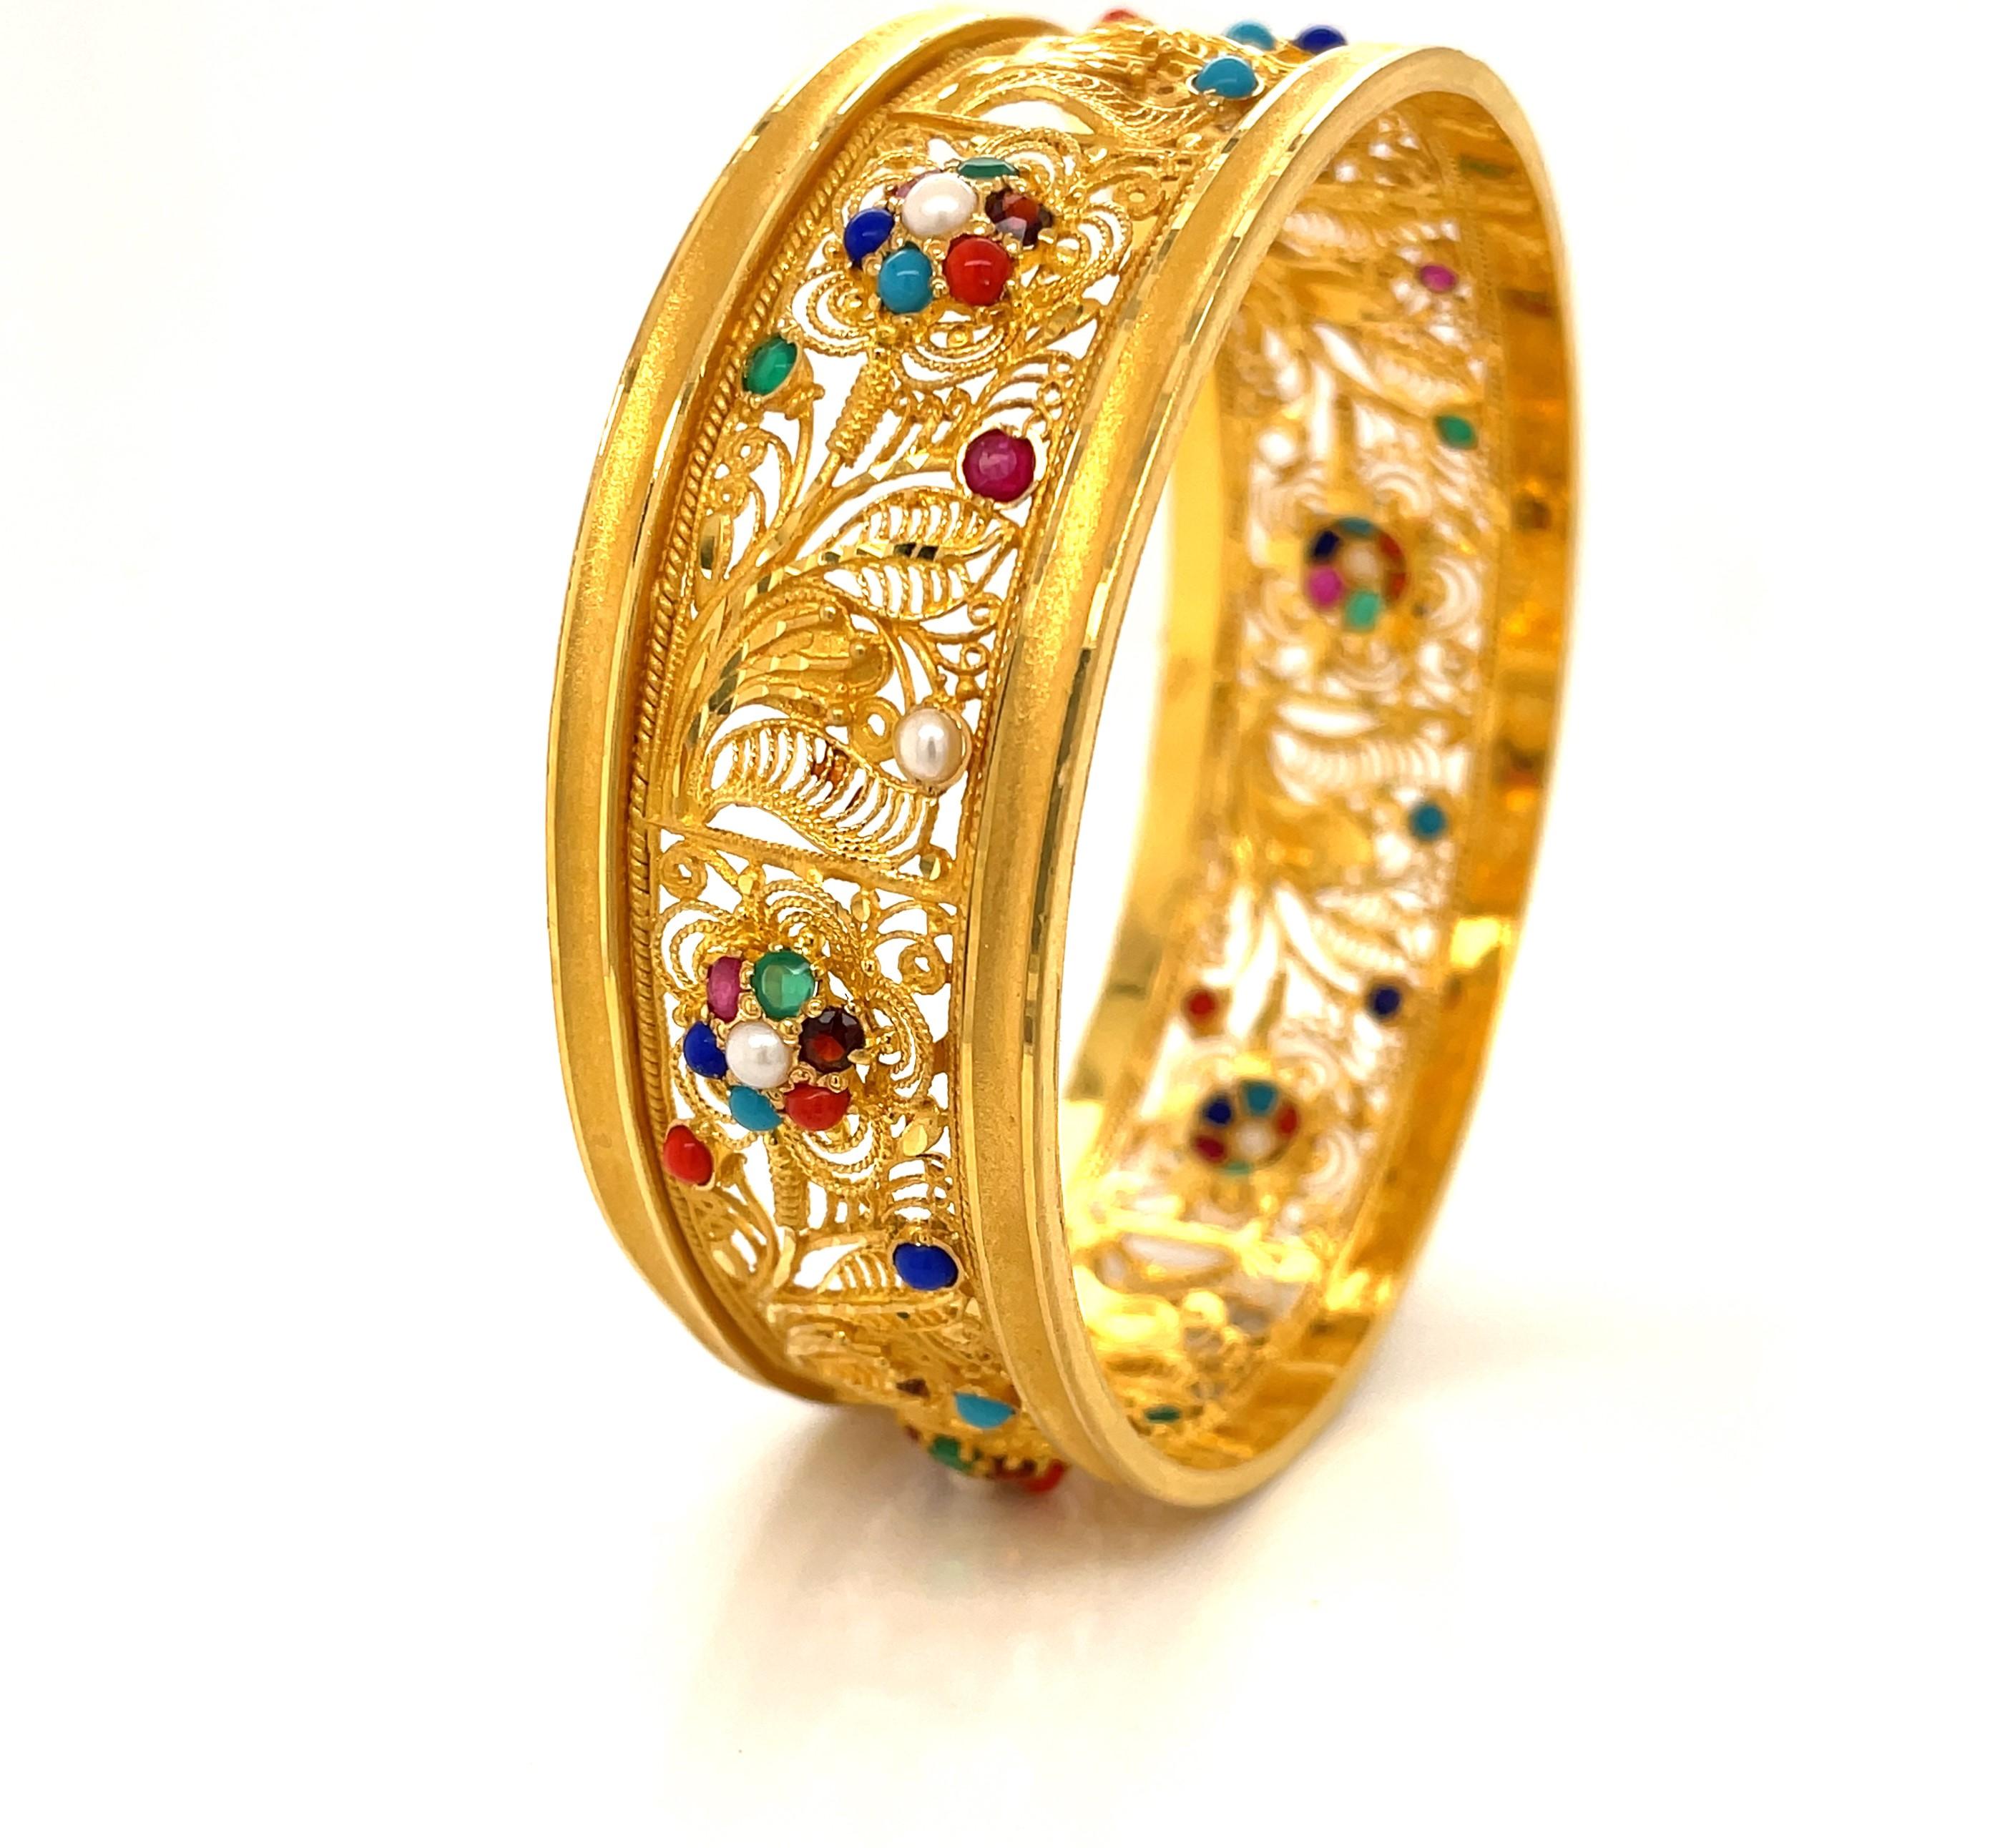 Truly impressive, this unique bangle bracelet is expertly handcrafted with floral and vine filigree in textures of satin and bright twenty two karat 22K yellow gold.  The intricate gold flora is further enhanced with various colorful gemstone